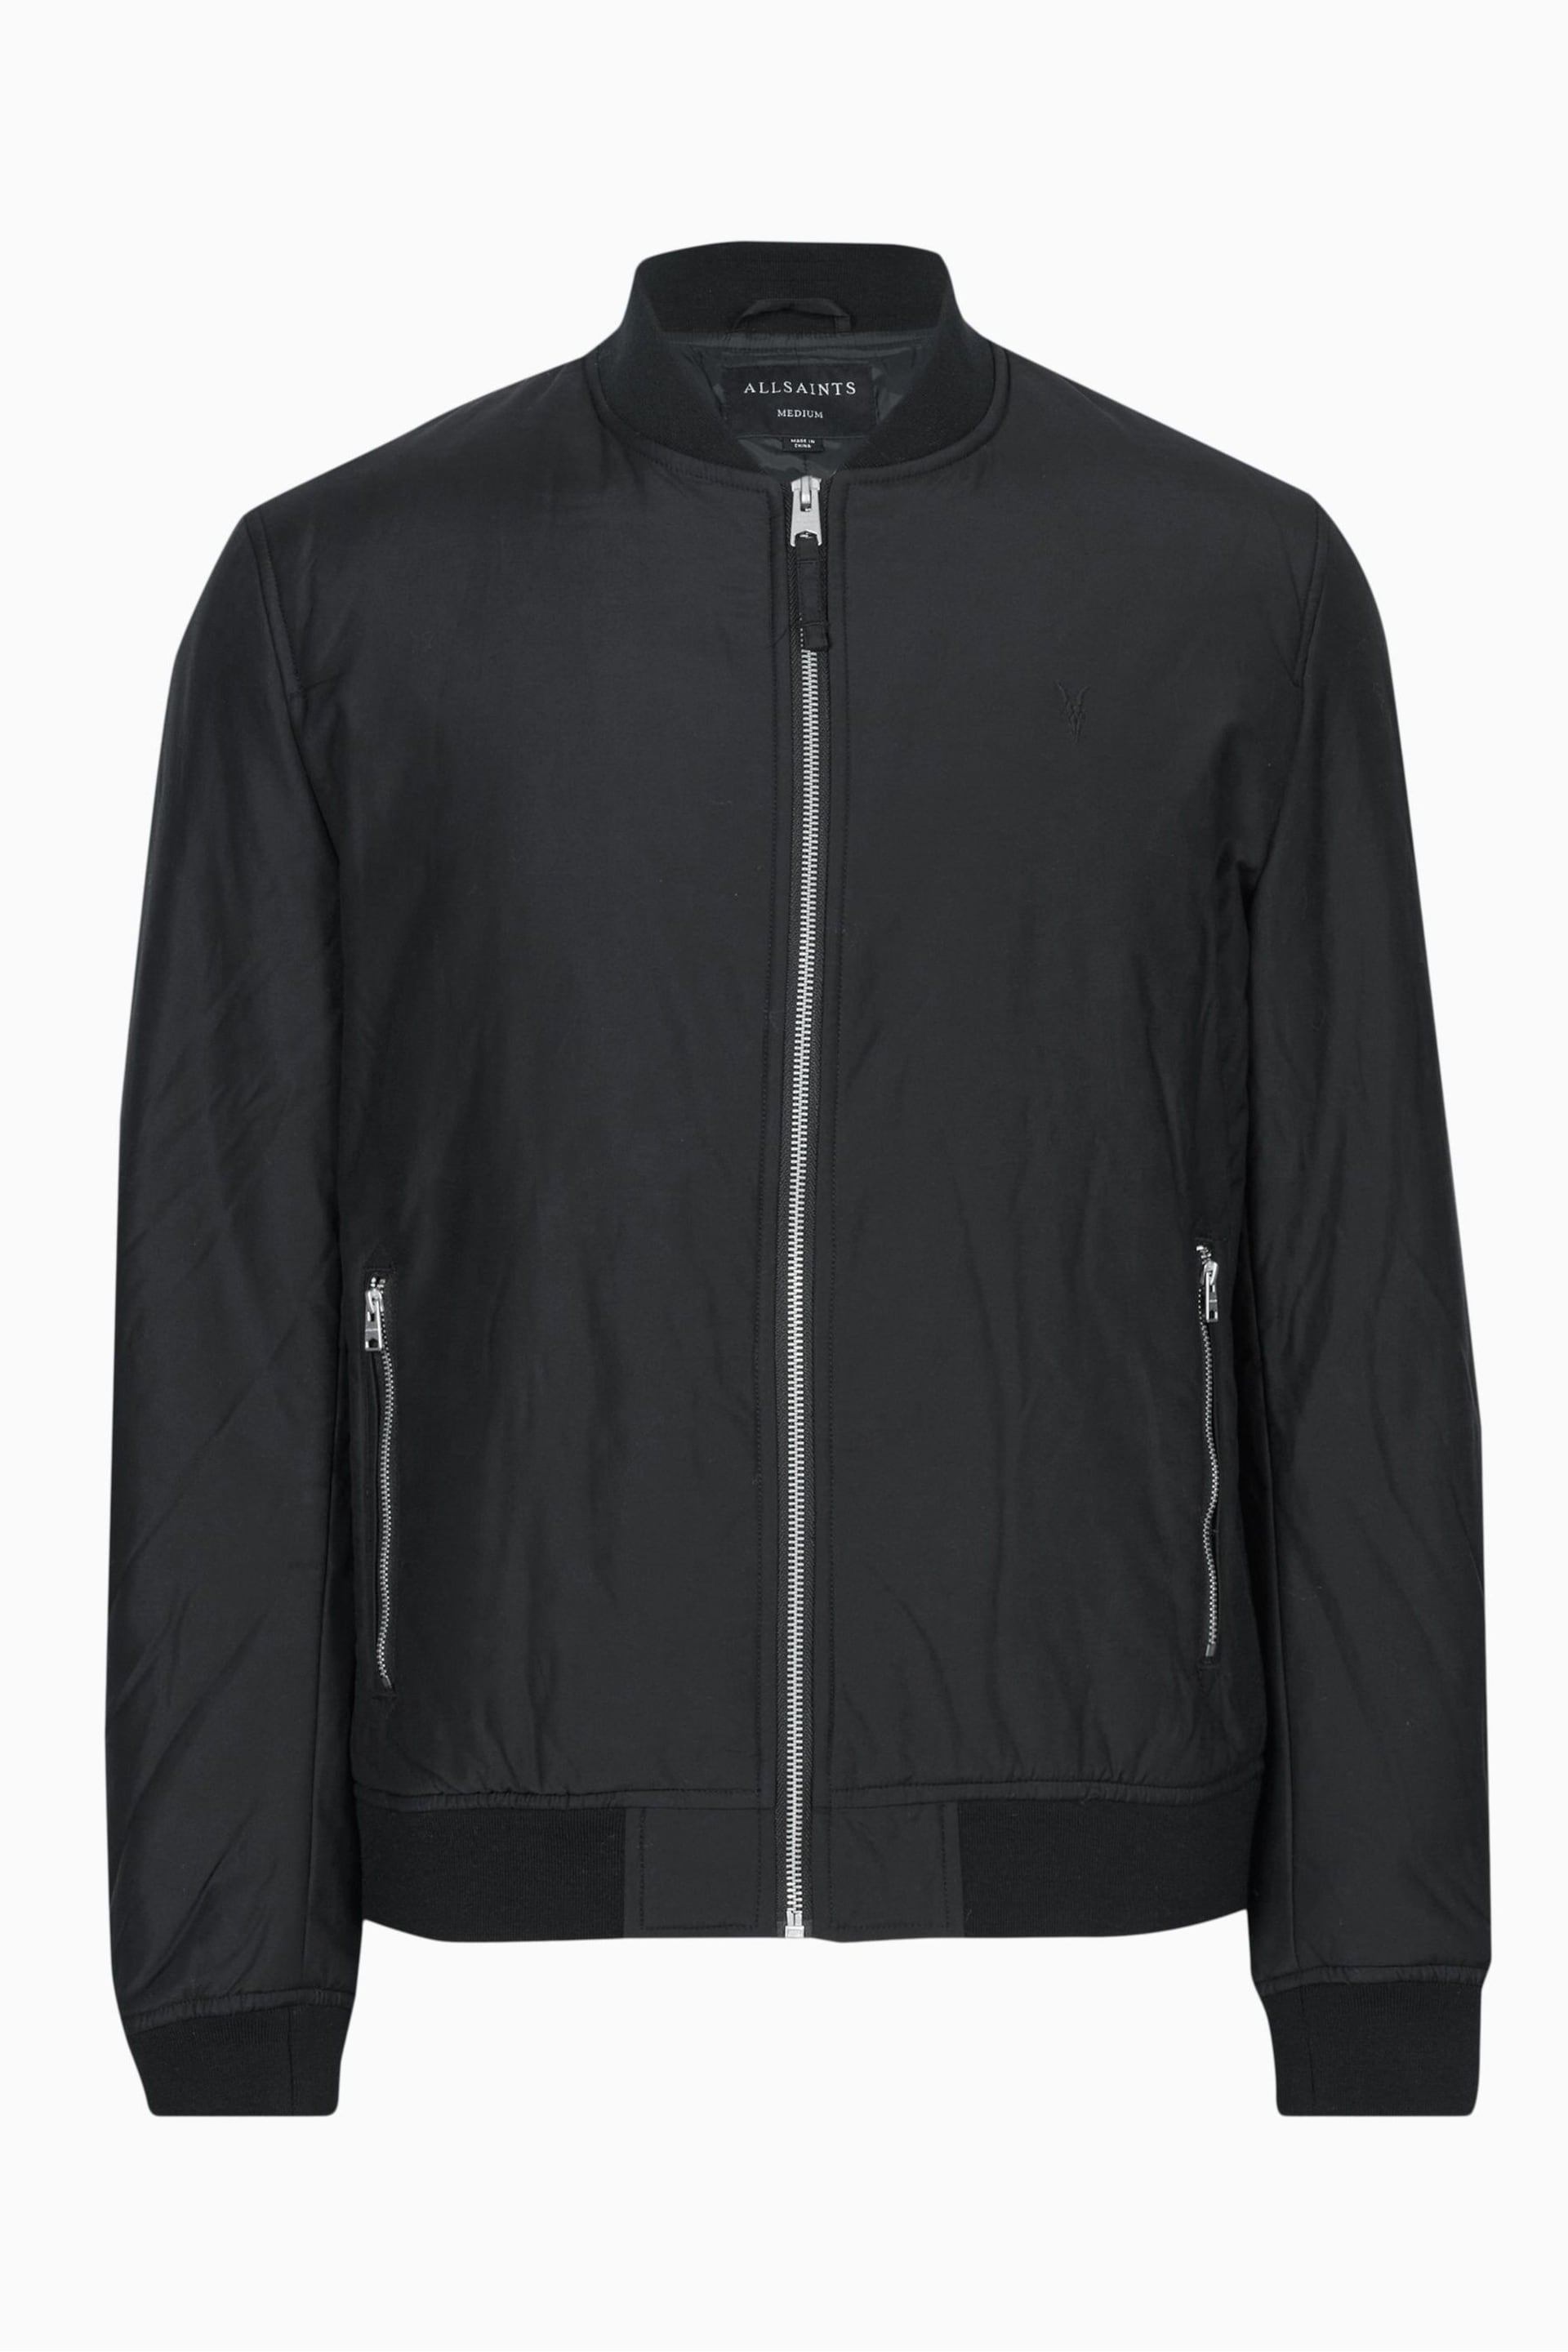 AllSaints Black Withrow Bomber Jacket - Image 7 of 7